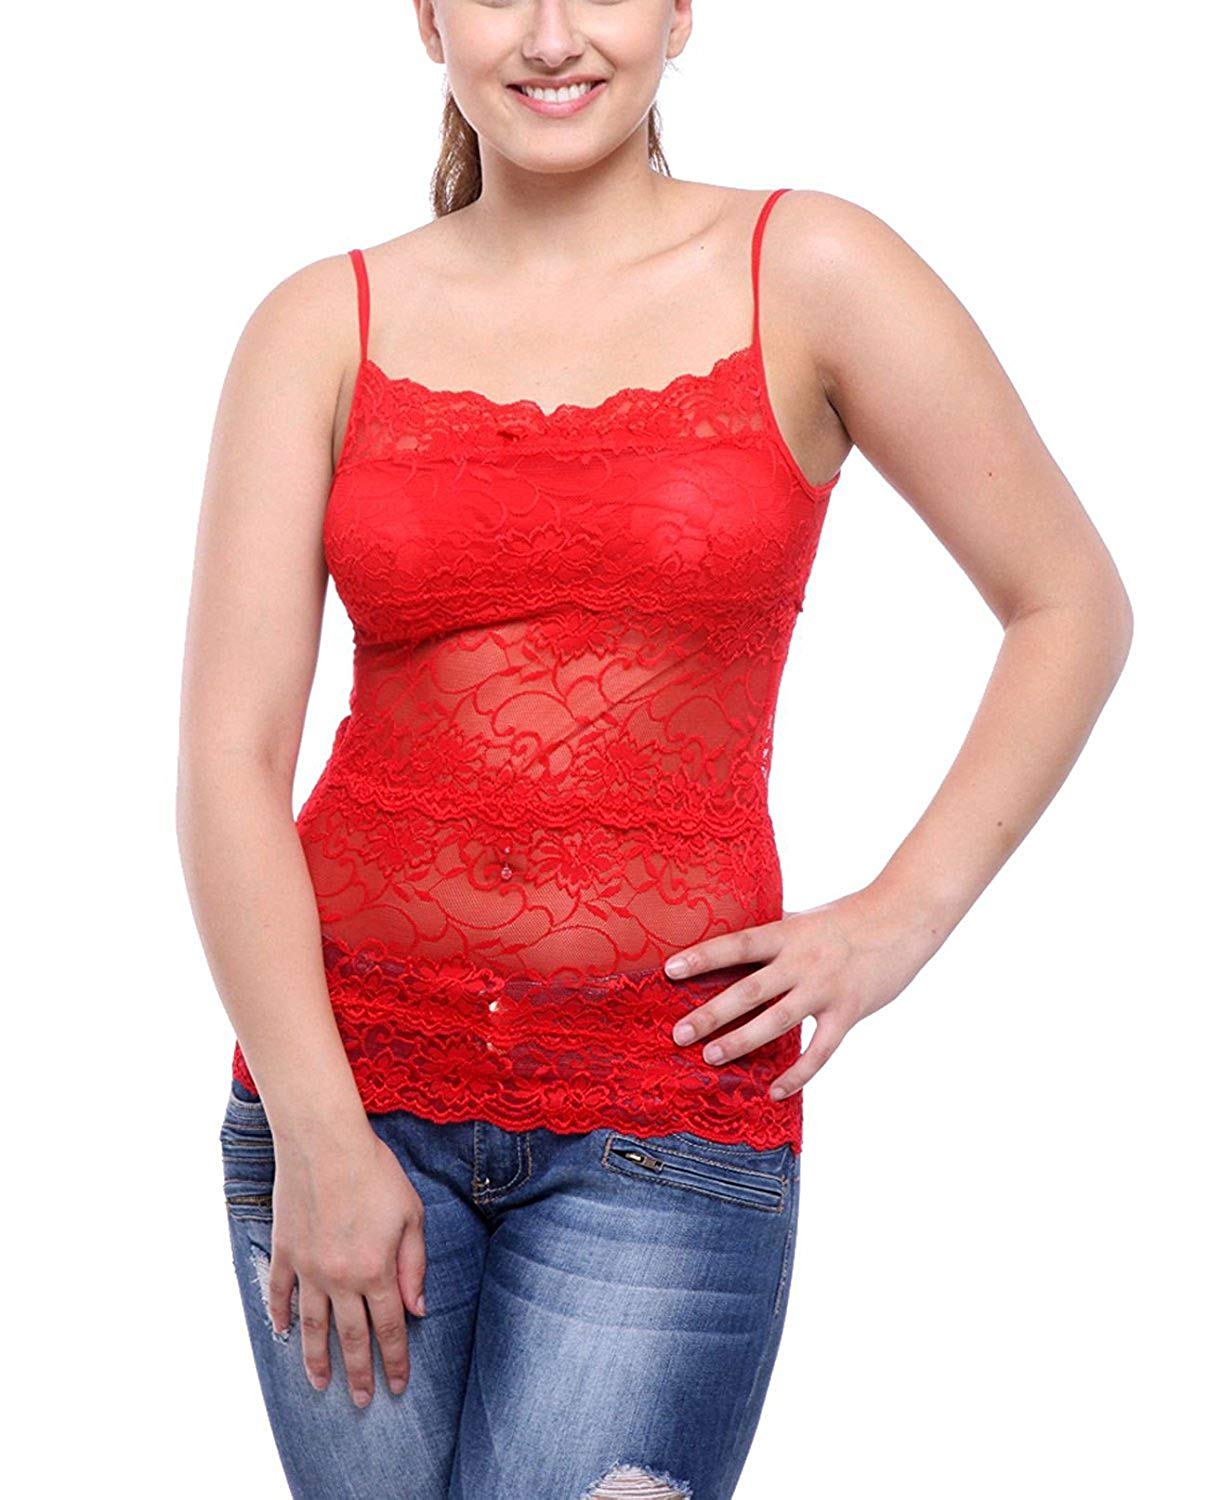 Worthington Red Camisoles for Women